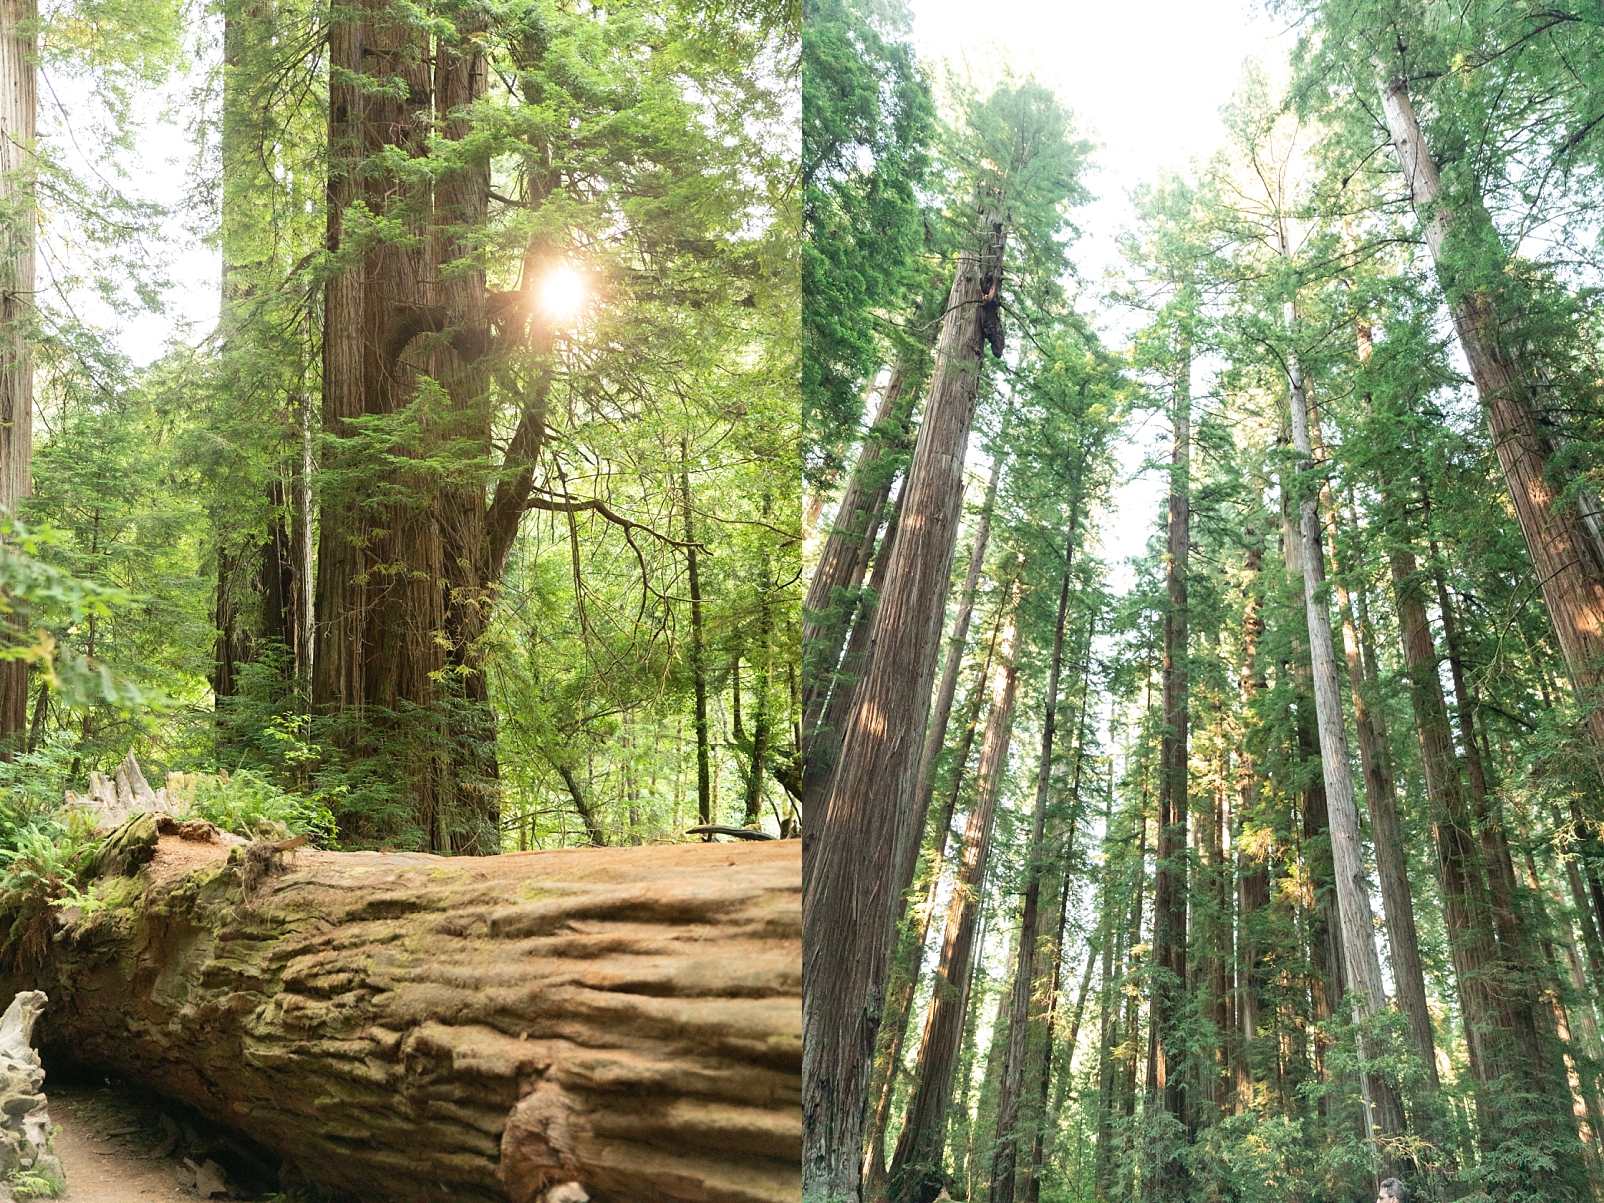 How to organize your travel photos of the Redwoods 